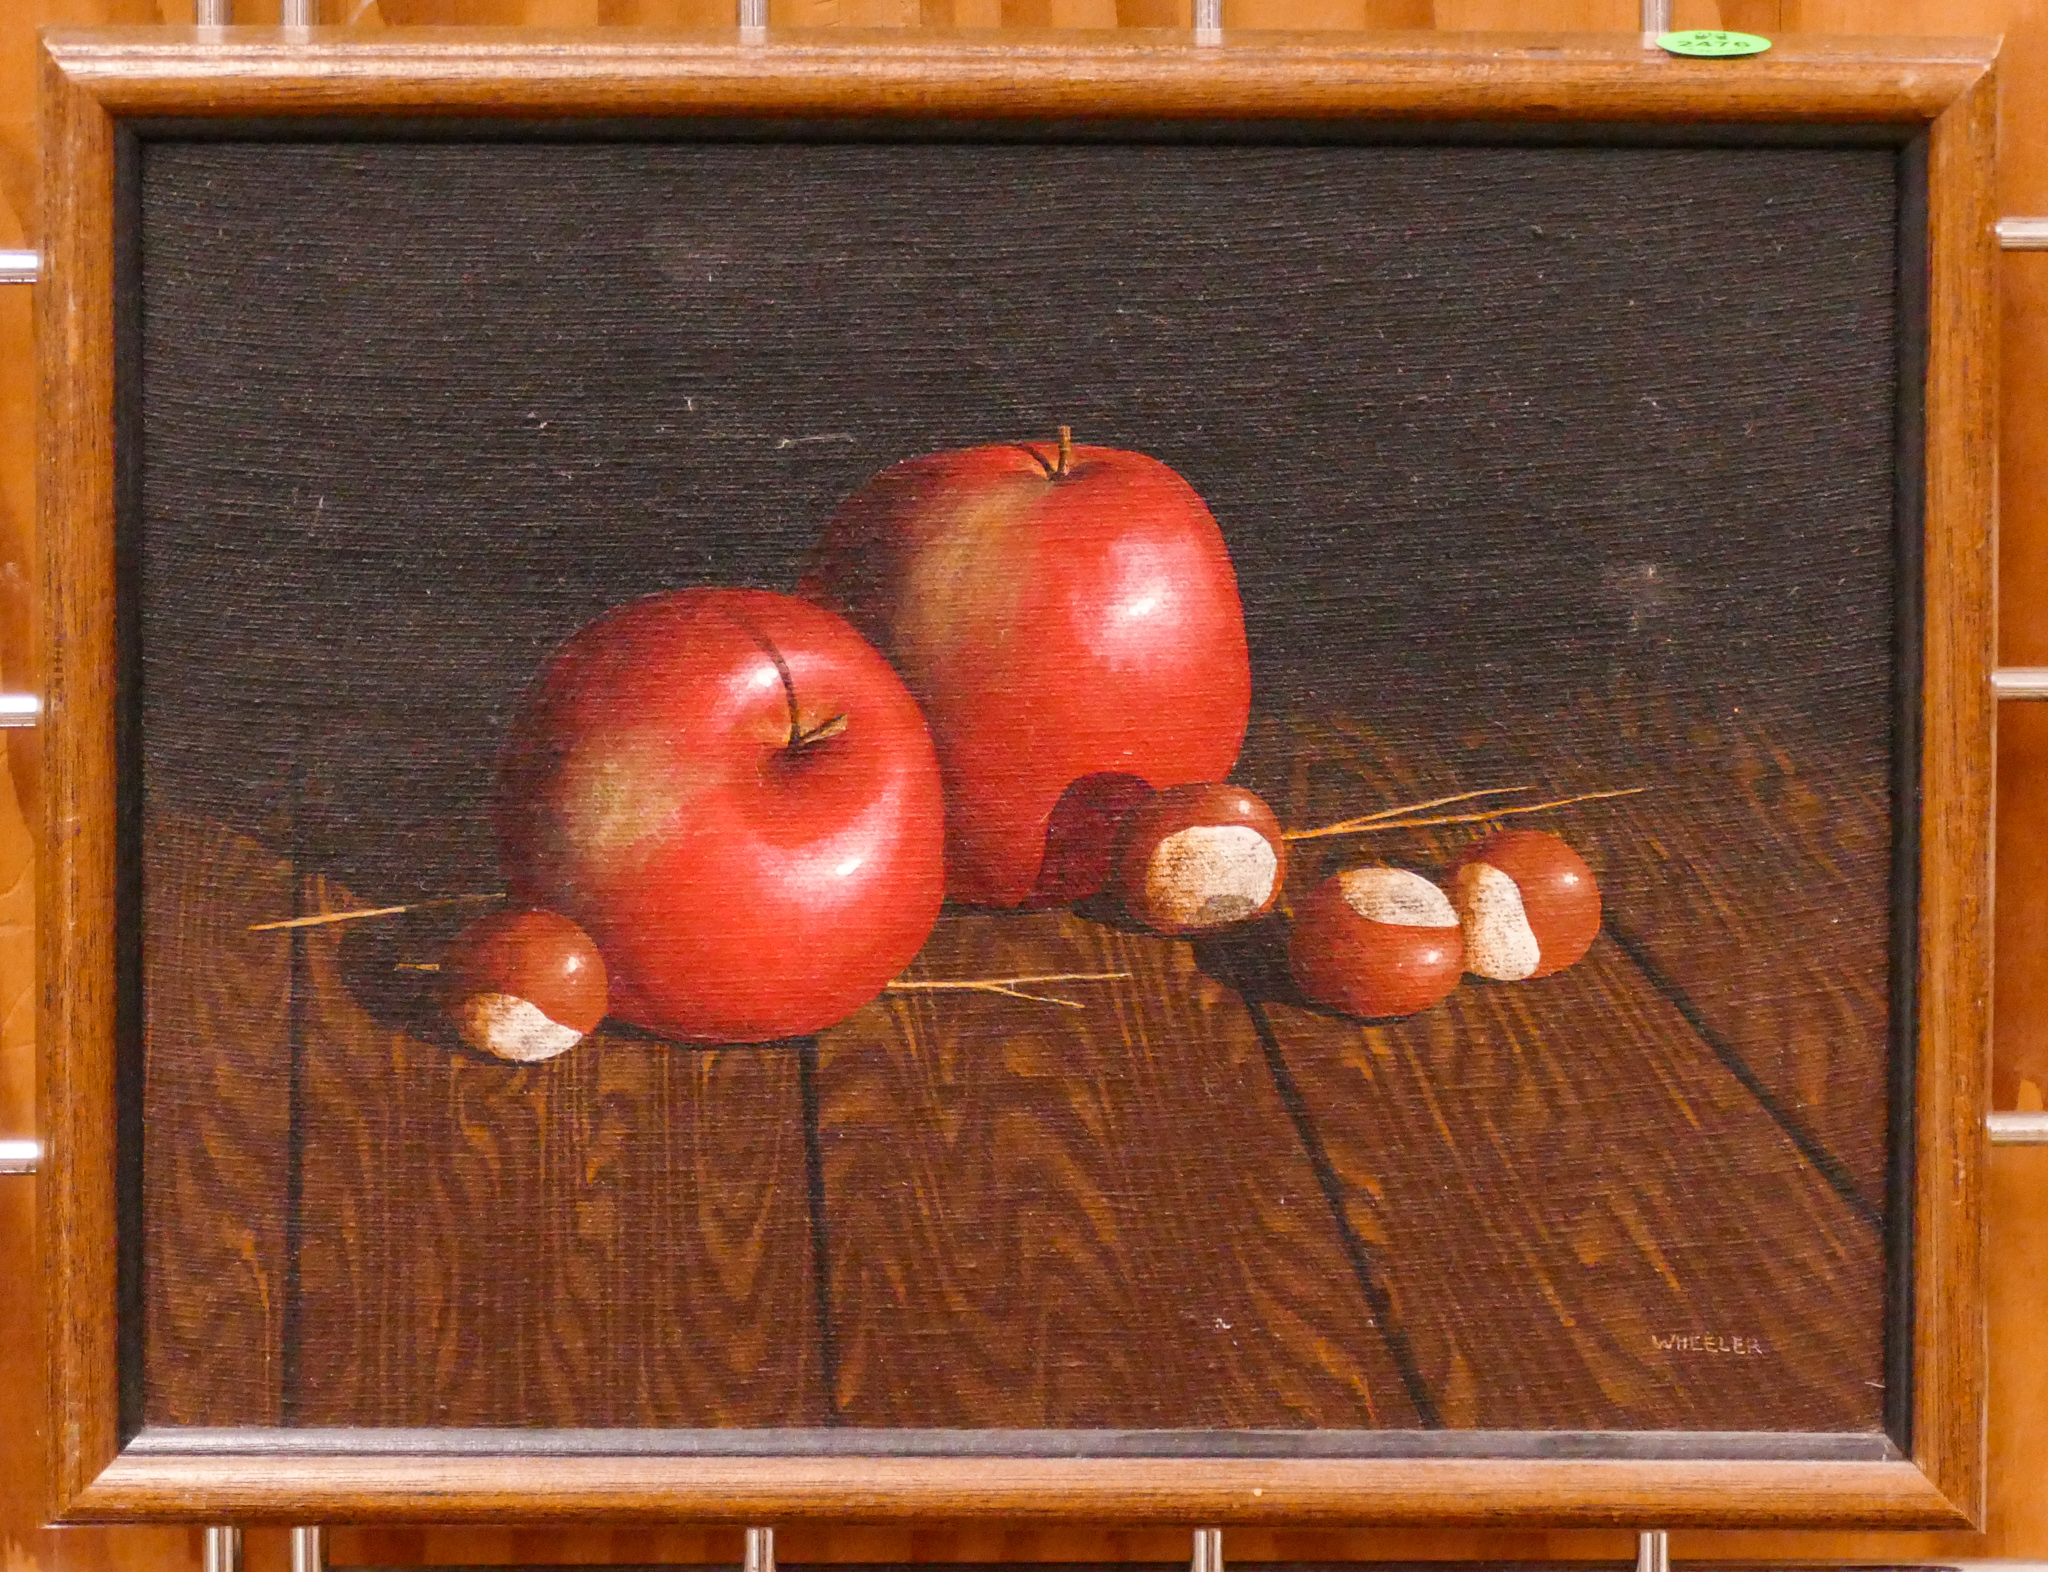 Wheeler 'Apples and Chestnuts'